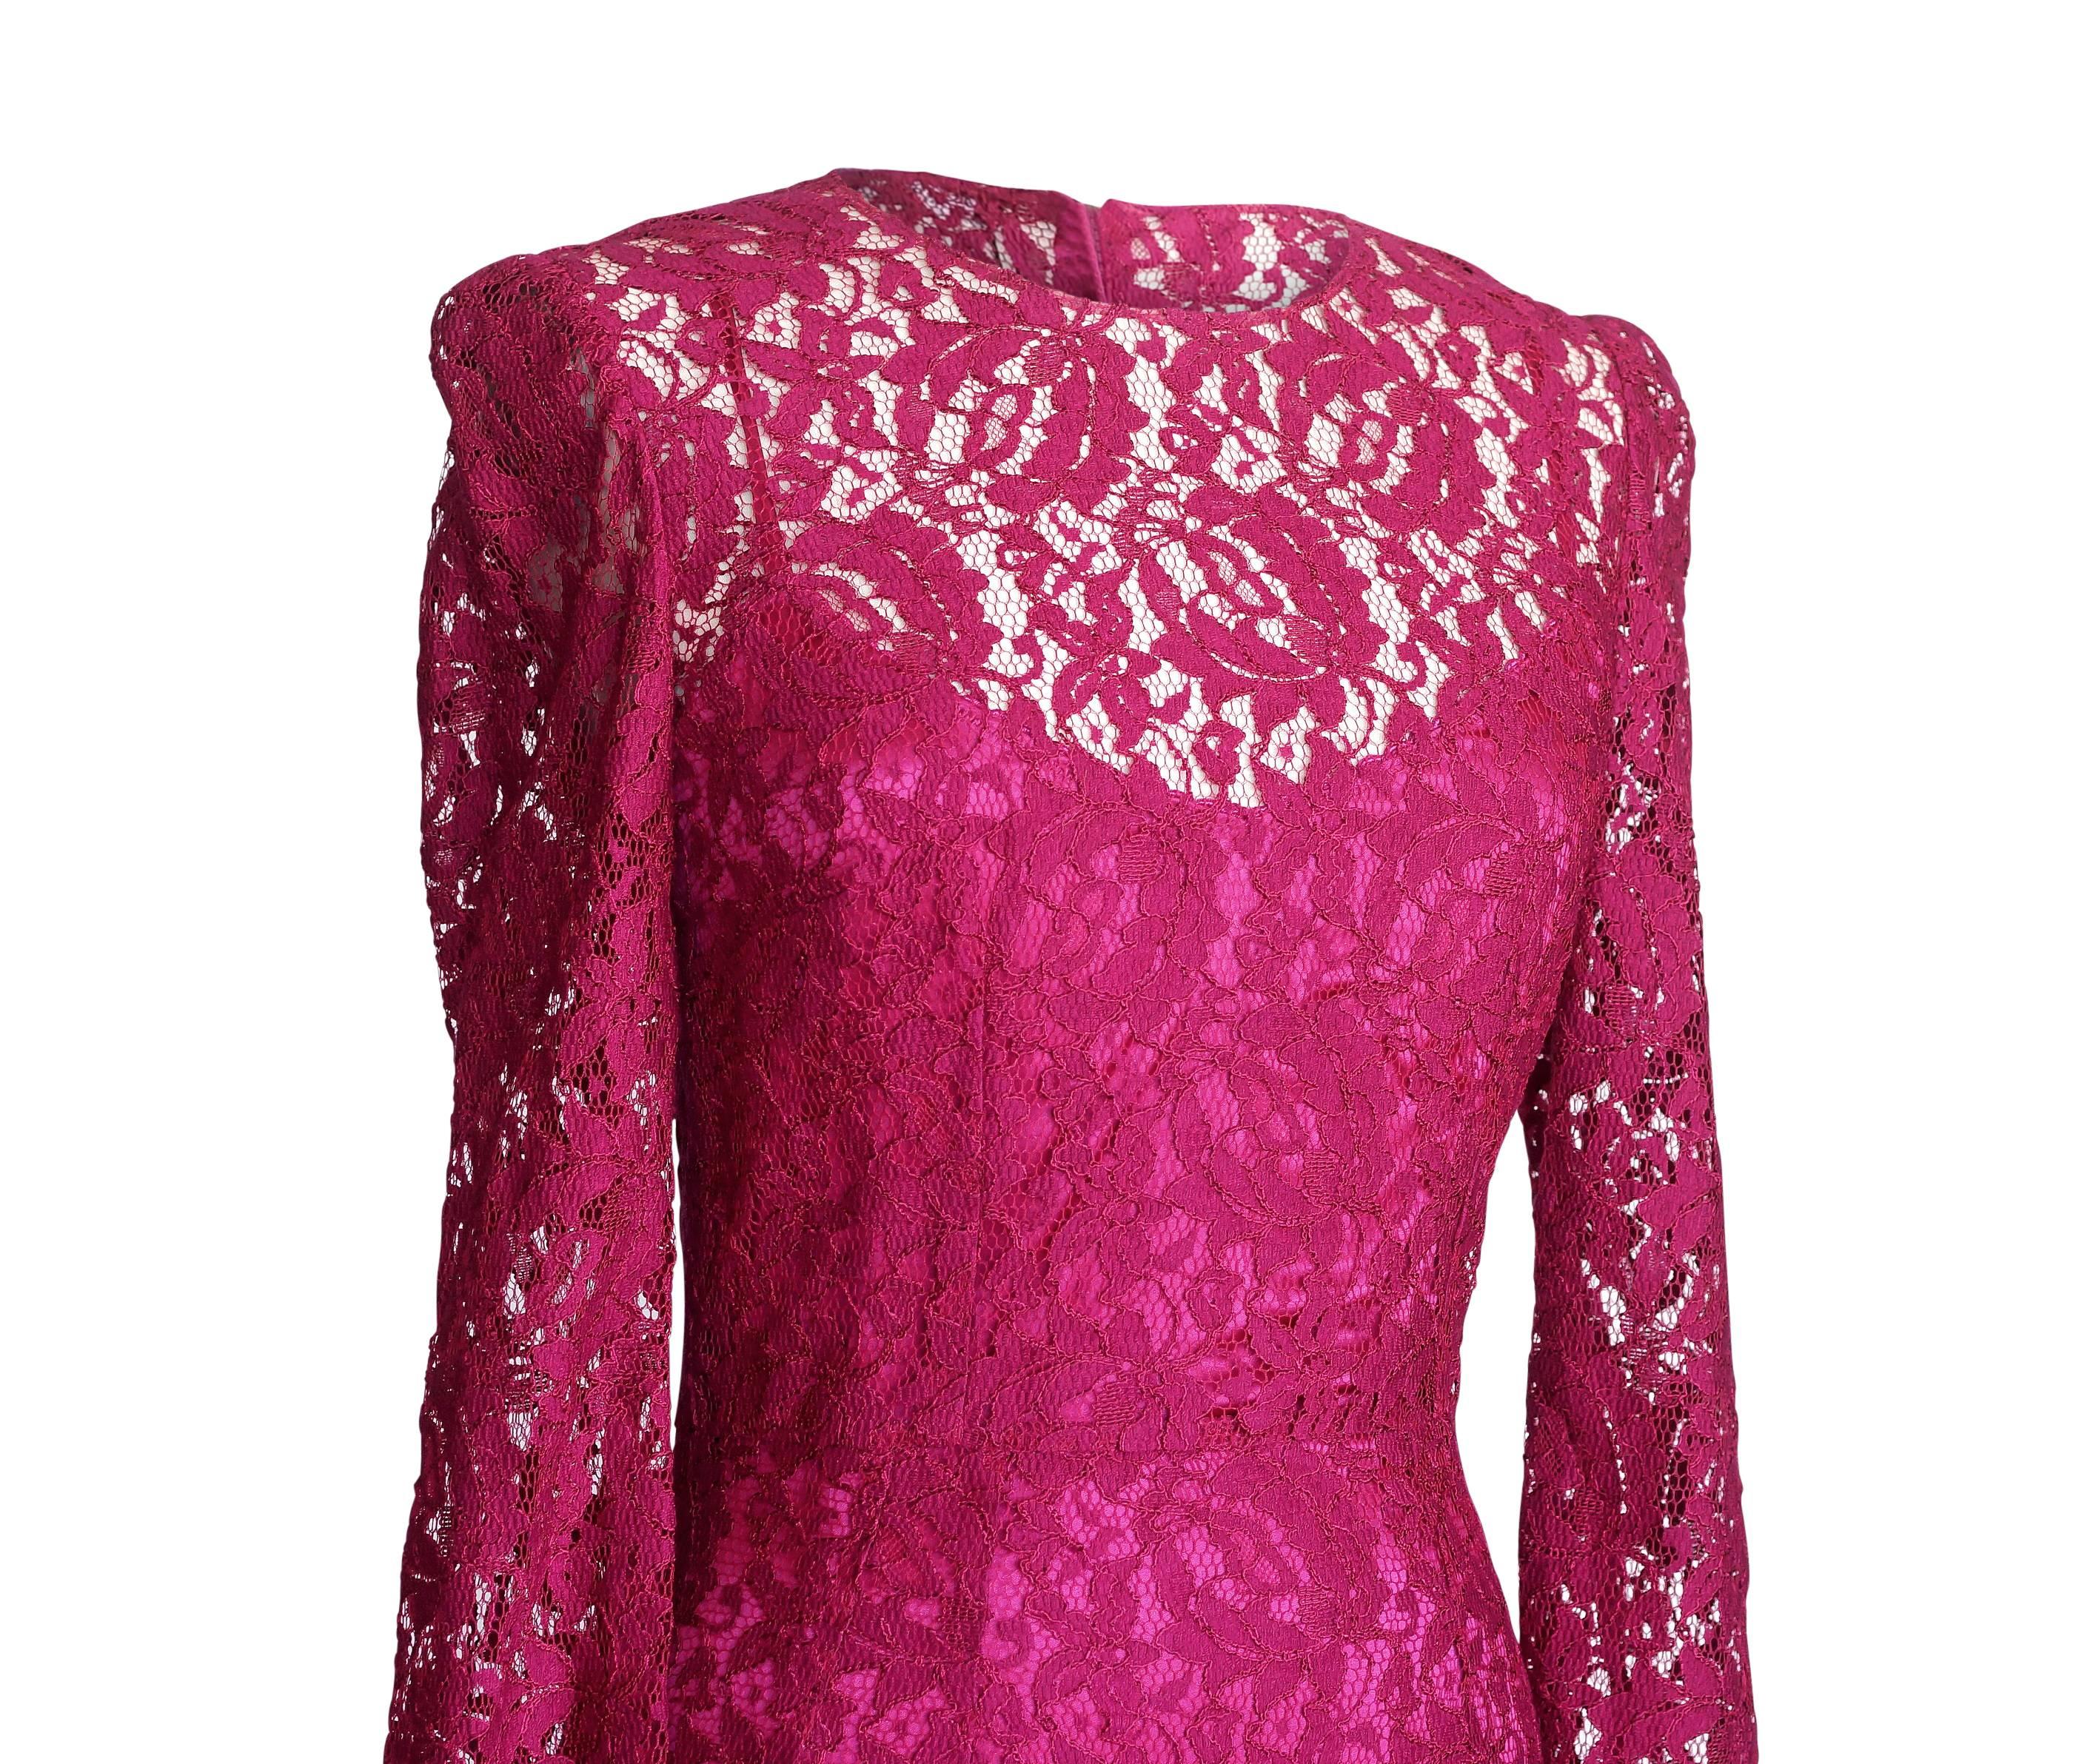 Classic Dolce&Gabbana jewel toned raspberry pink lace dress.  
Beautifully cut shaped long sleeved rich lace.
Rear hidden zip.
Comes with separate raspberry silk slip.
Fabric is rayon and nylon.
NEW or NEVER WORN.
final sale   
  
SIZE  42
USA SIZE 